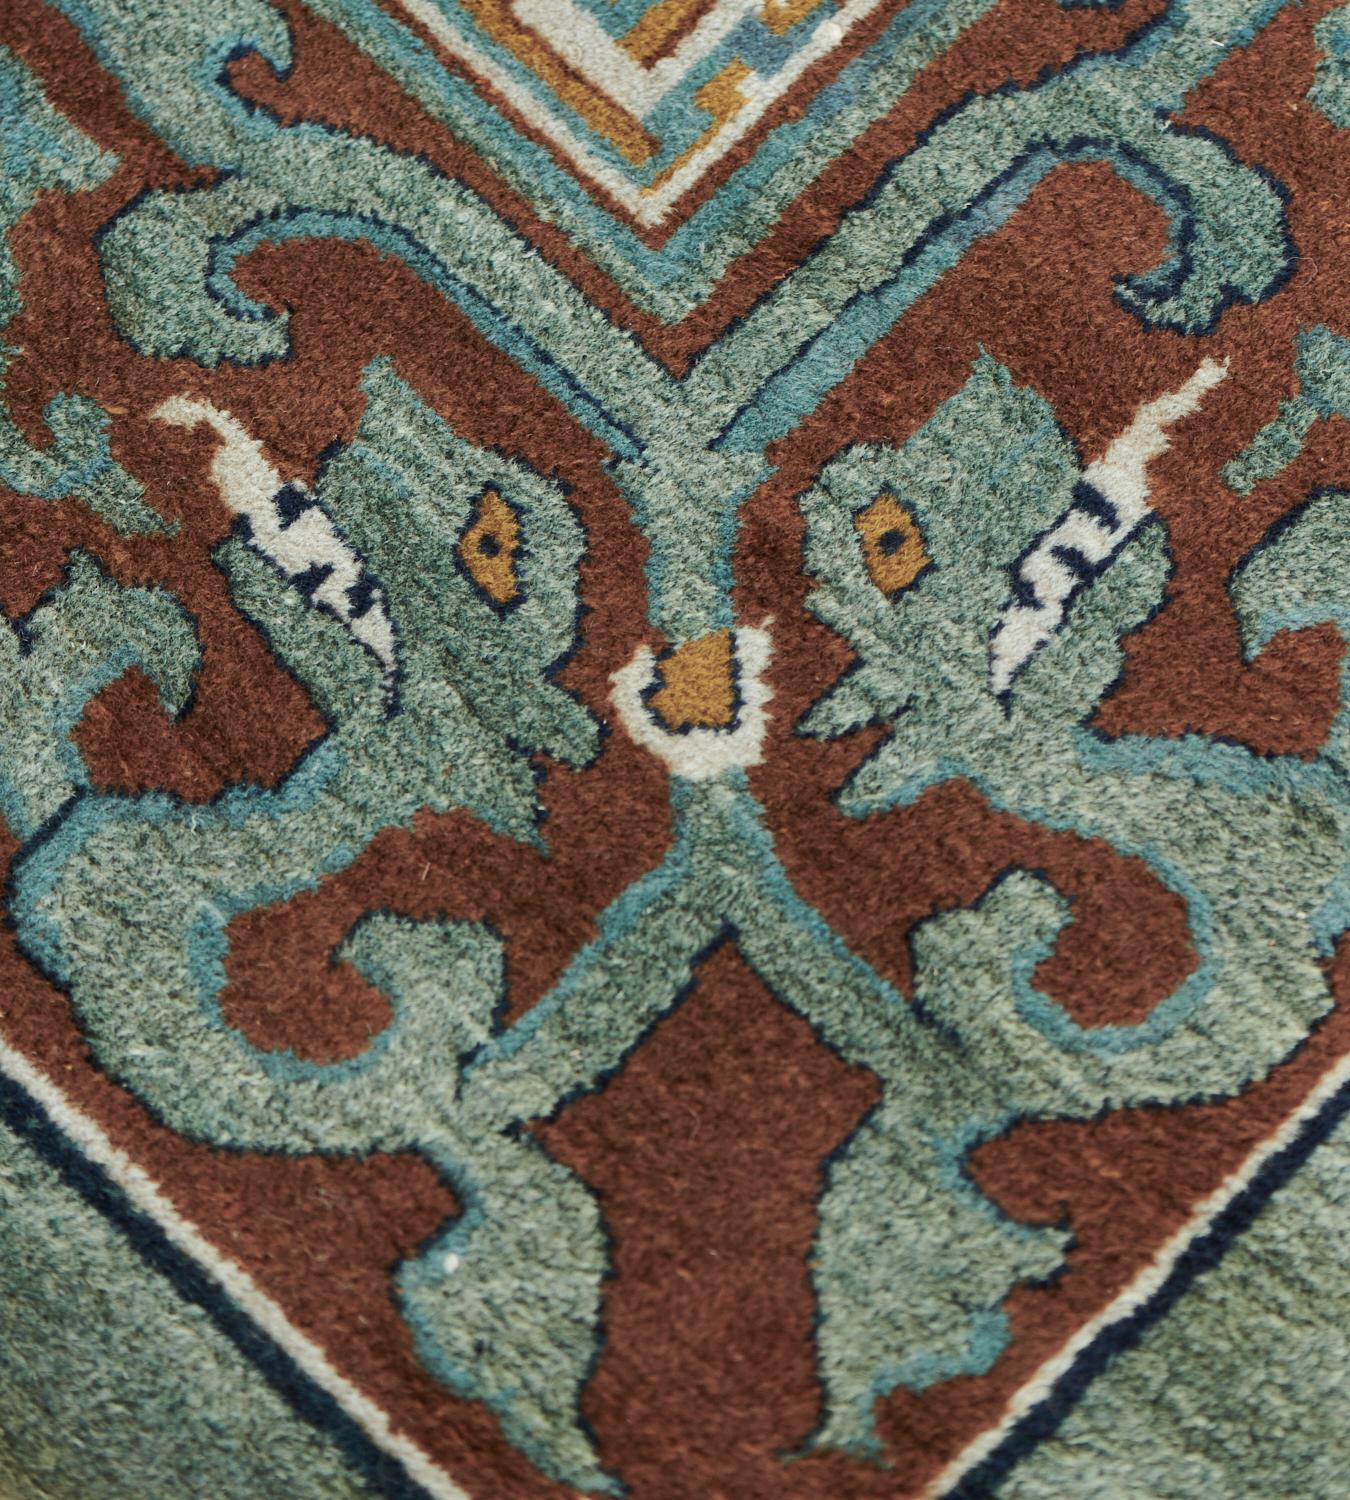 This antique Beijing rug from Northern China has an eau-de-nil field with an overall design of scattered ivory, golden-brown and indigo-blue flowerheads issuing angular leafy tendril vine stems surrounded by scattered butterflies,in a caramel-brown